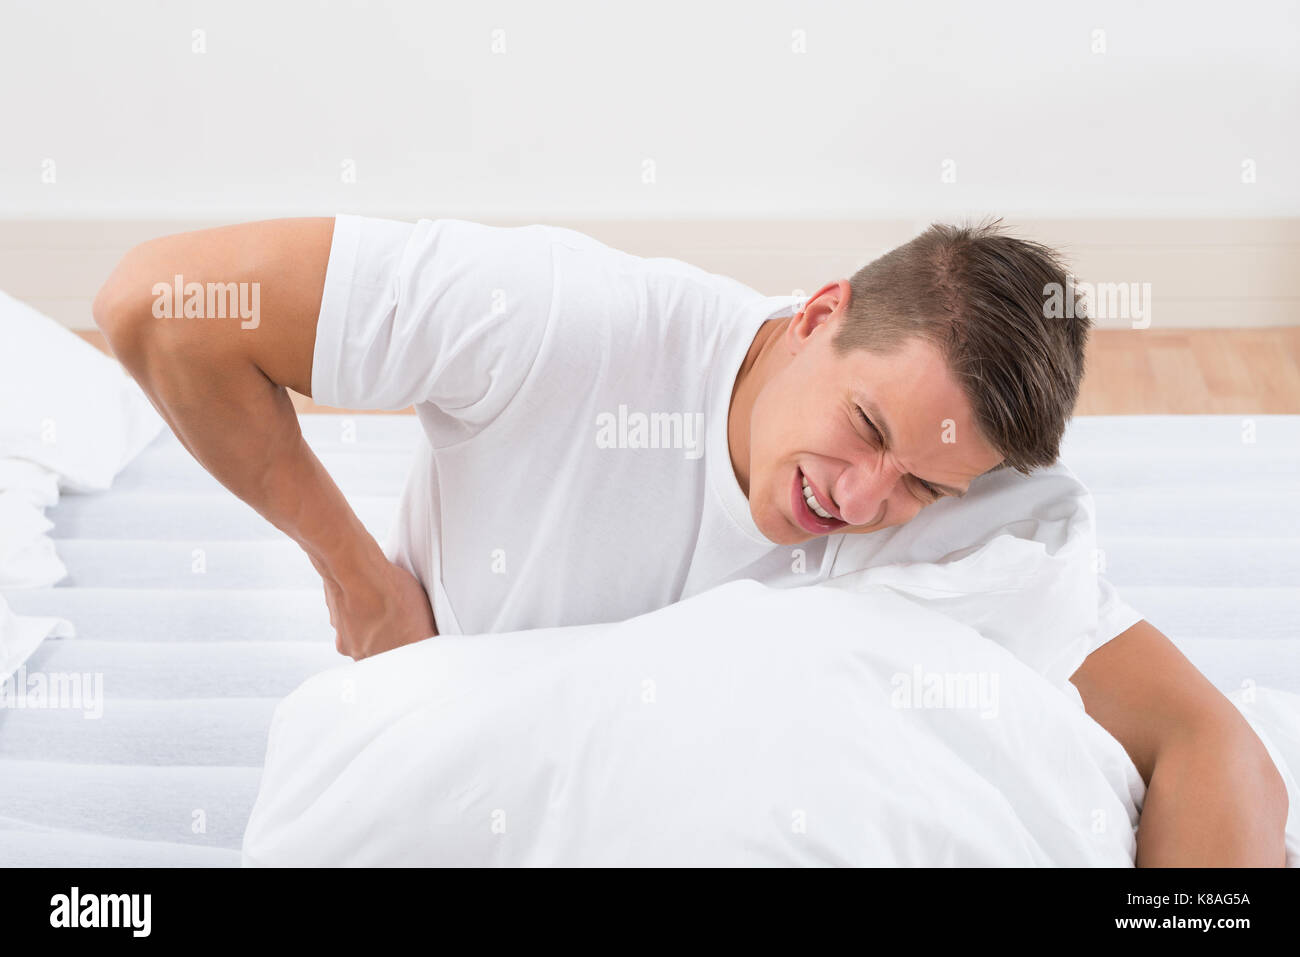 Young Man On Bed Suffering From Backache Stock Photo